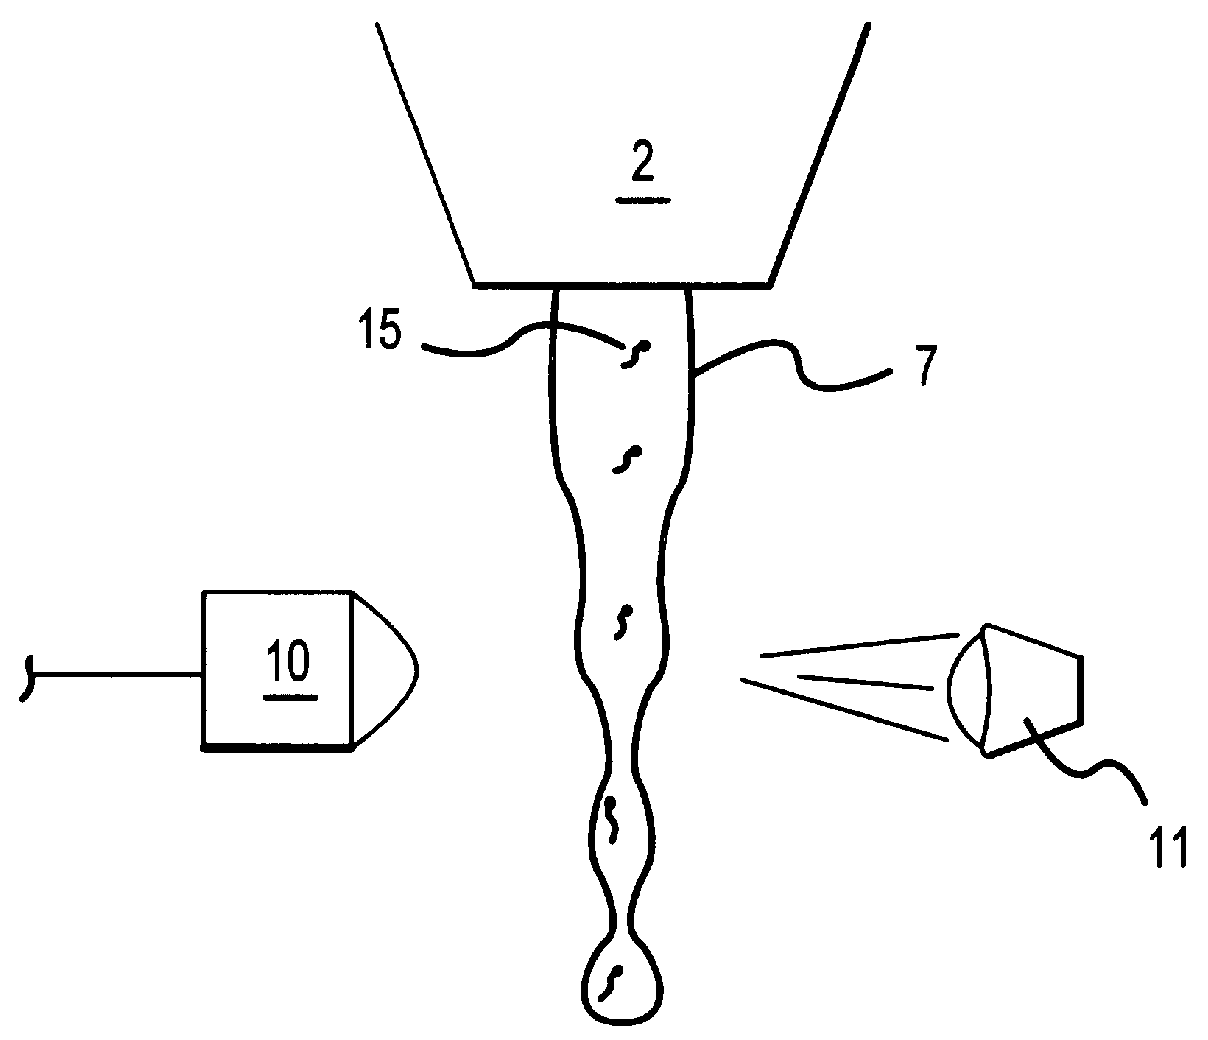 Sheath fluids and collection systems for sex-specific cytometer sorting of sperm